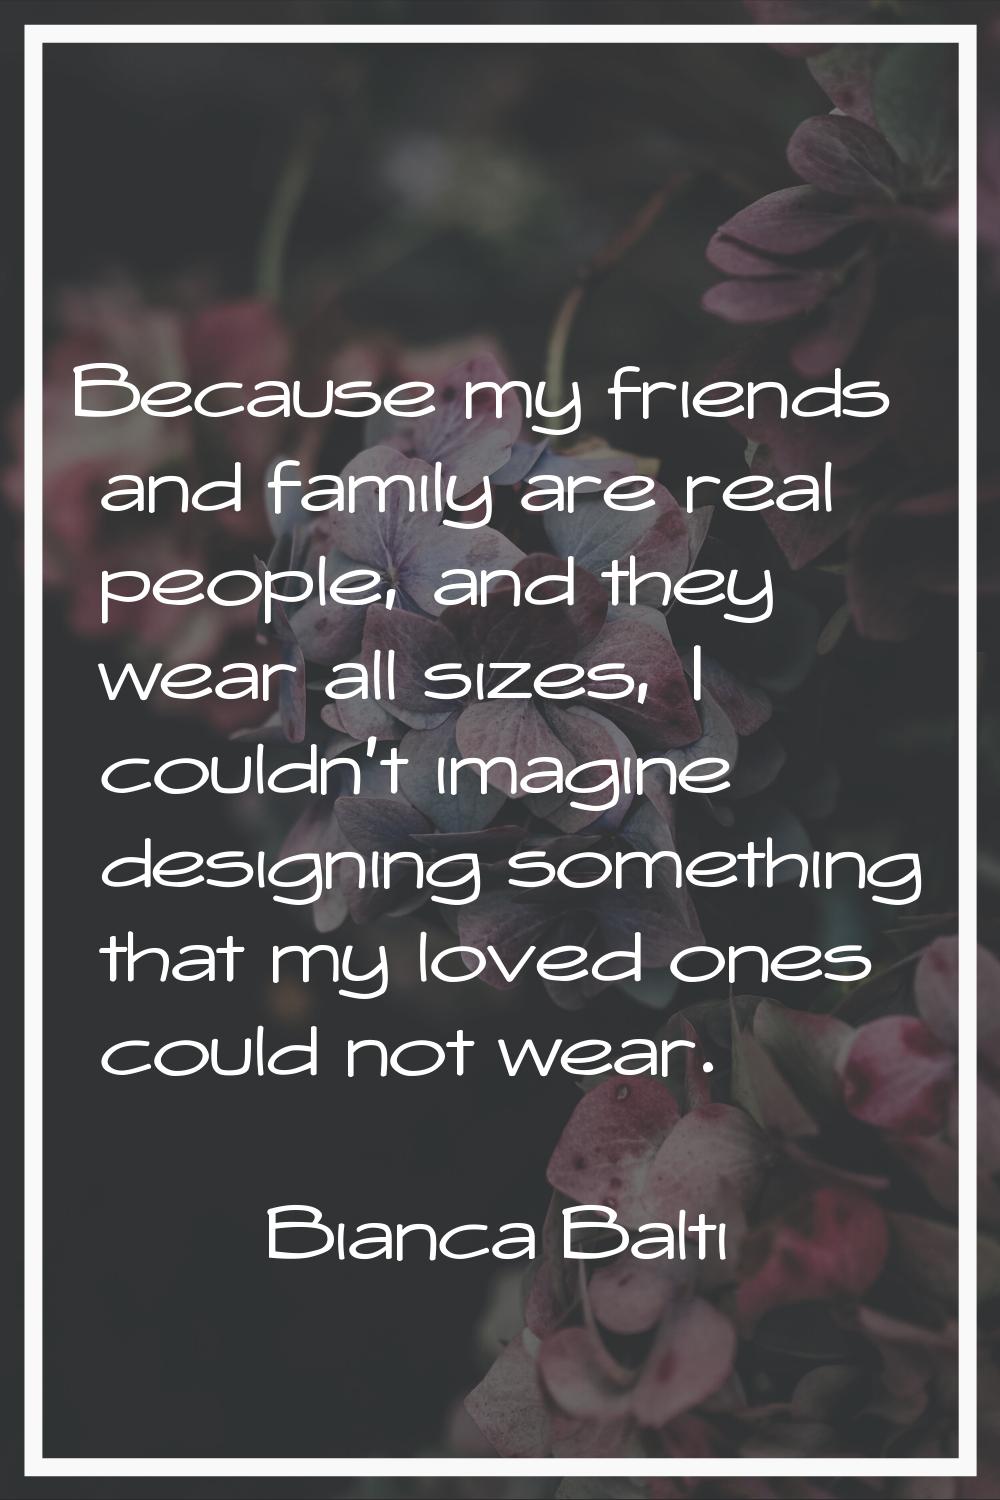 Because my friends and family are real people, and they wear all sizes, I couldn't imagine designin